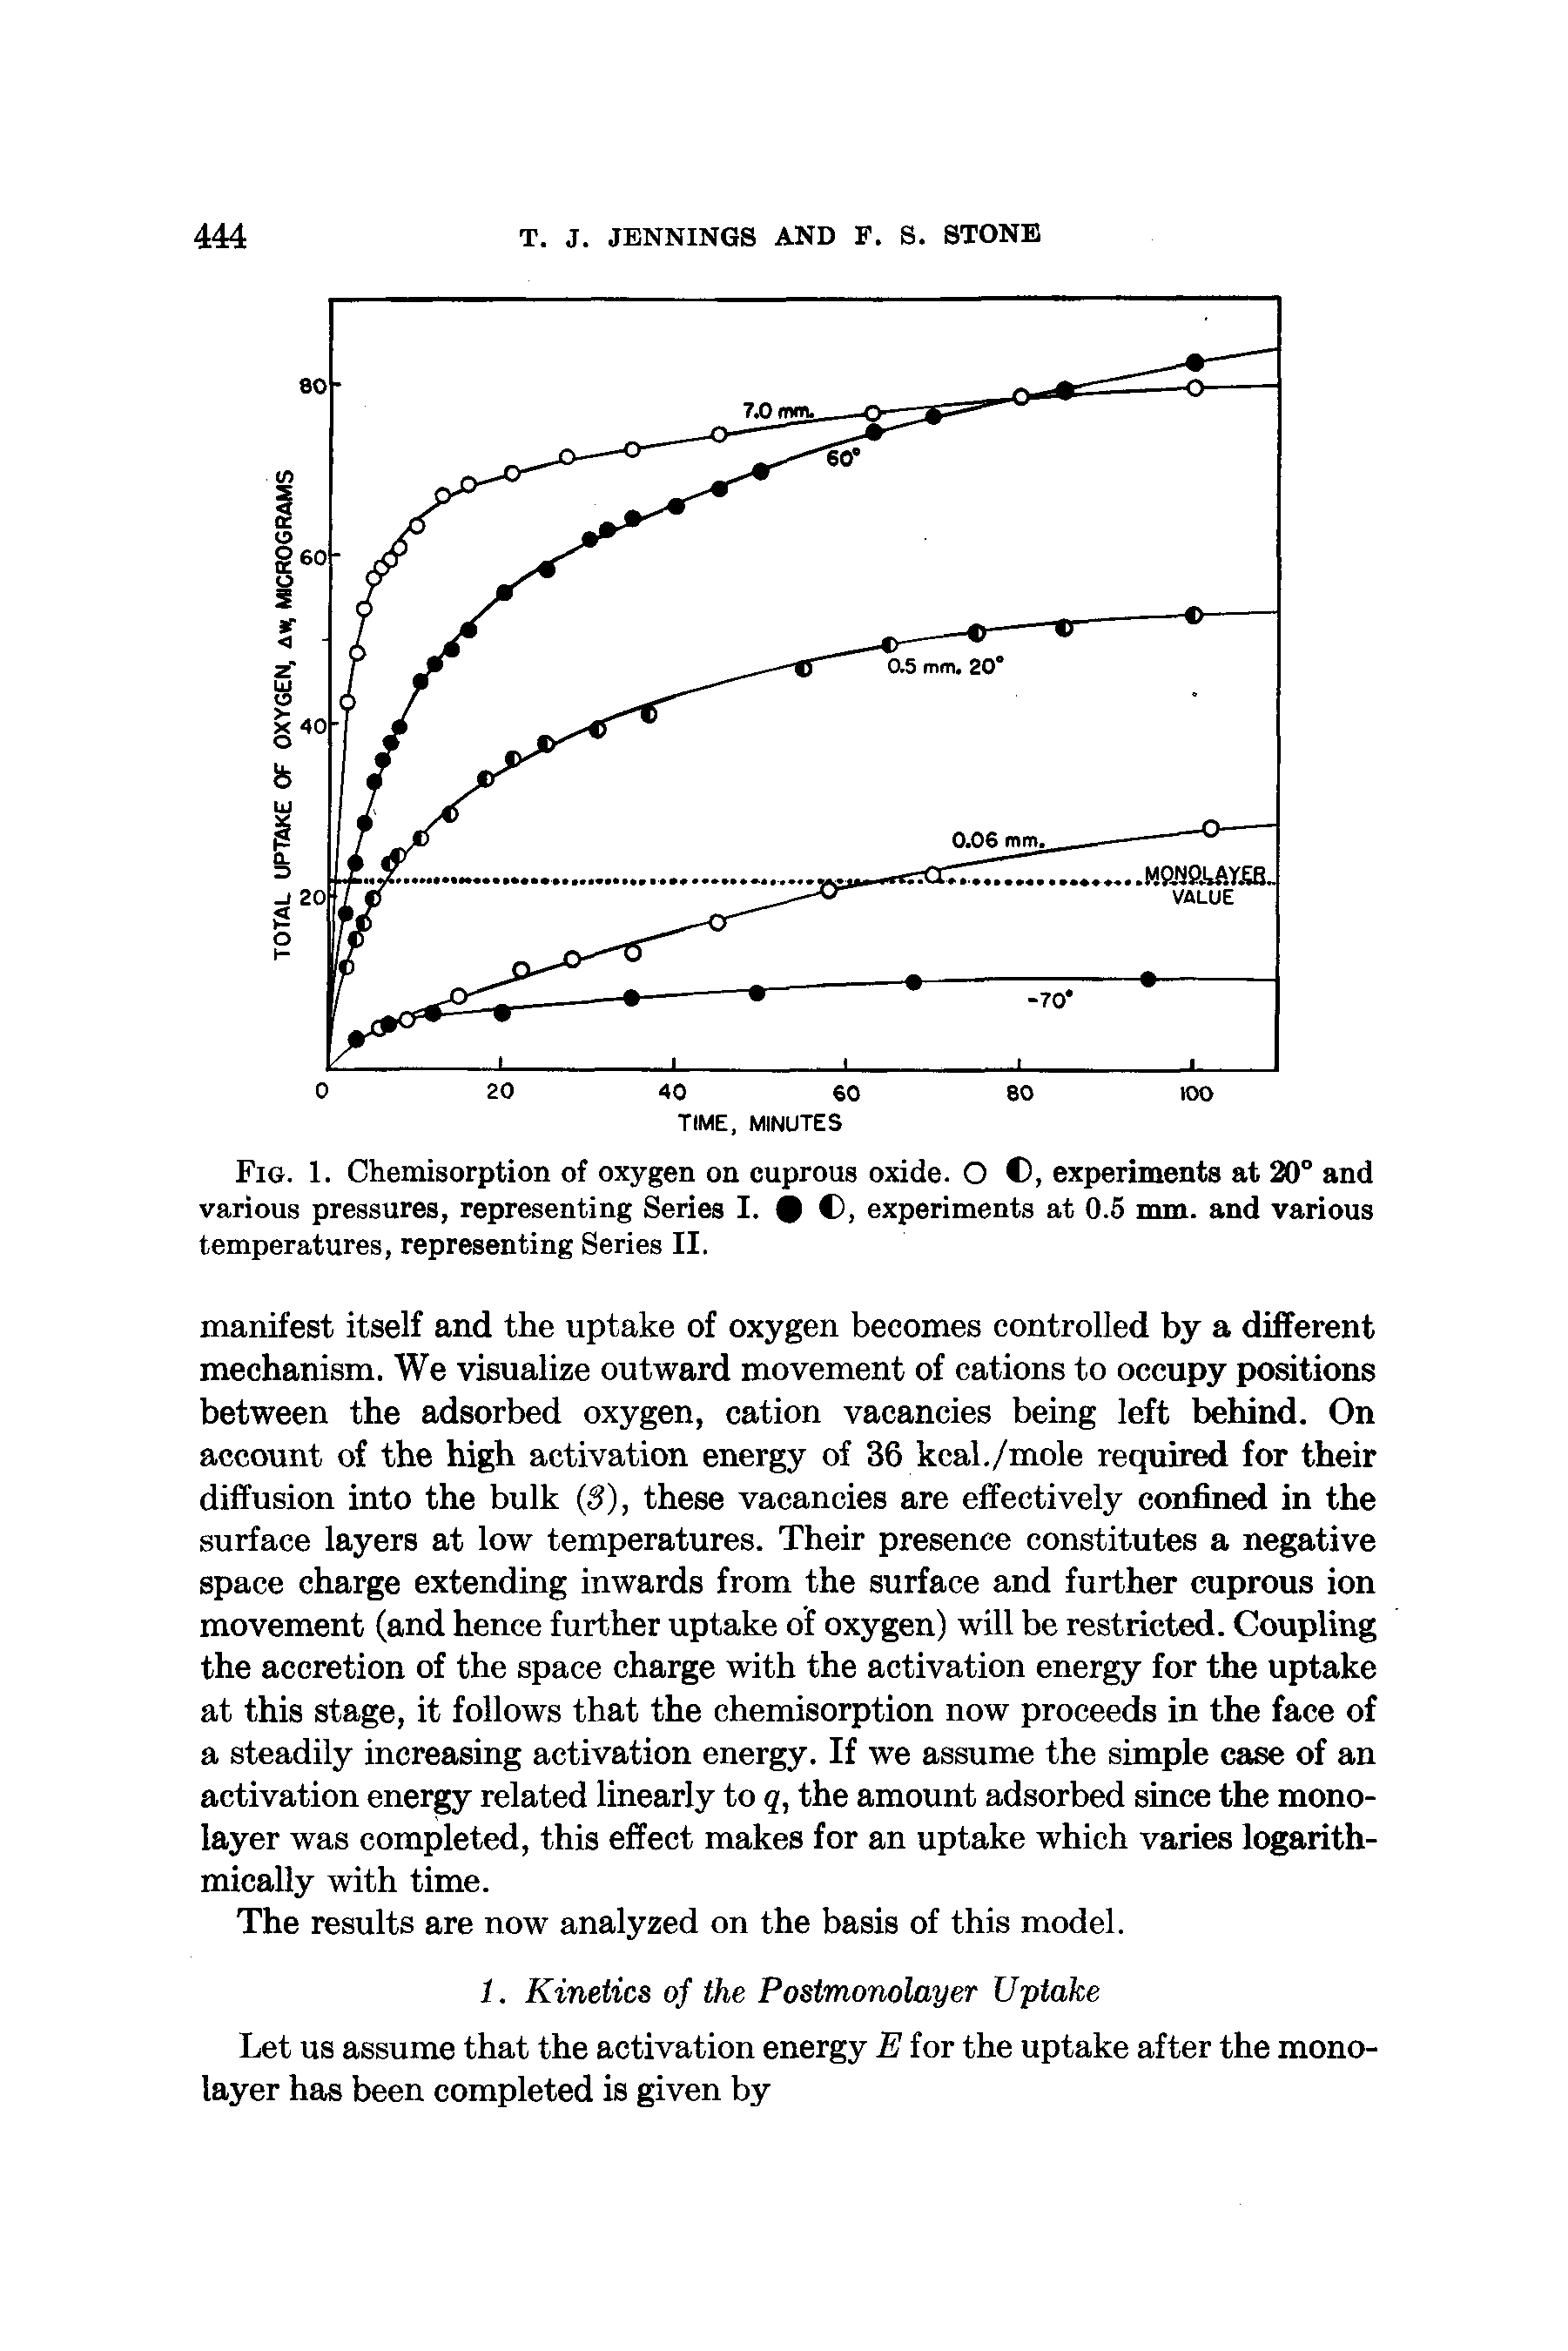 Fig. 1. Chemisorption of oxygen on cuprous oxide. O C, experiments at 20° and various pressures, representing Series I. 9 C, experiments at 0.5 mm. and various temperatures, representing Series II.